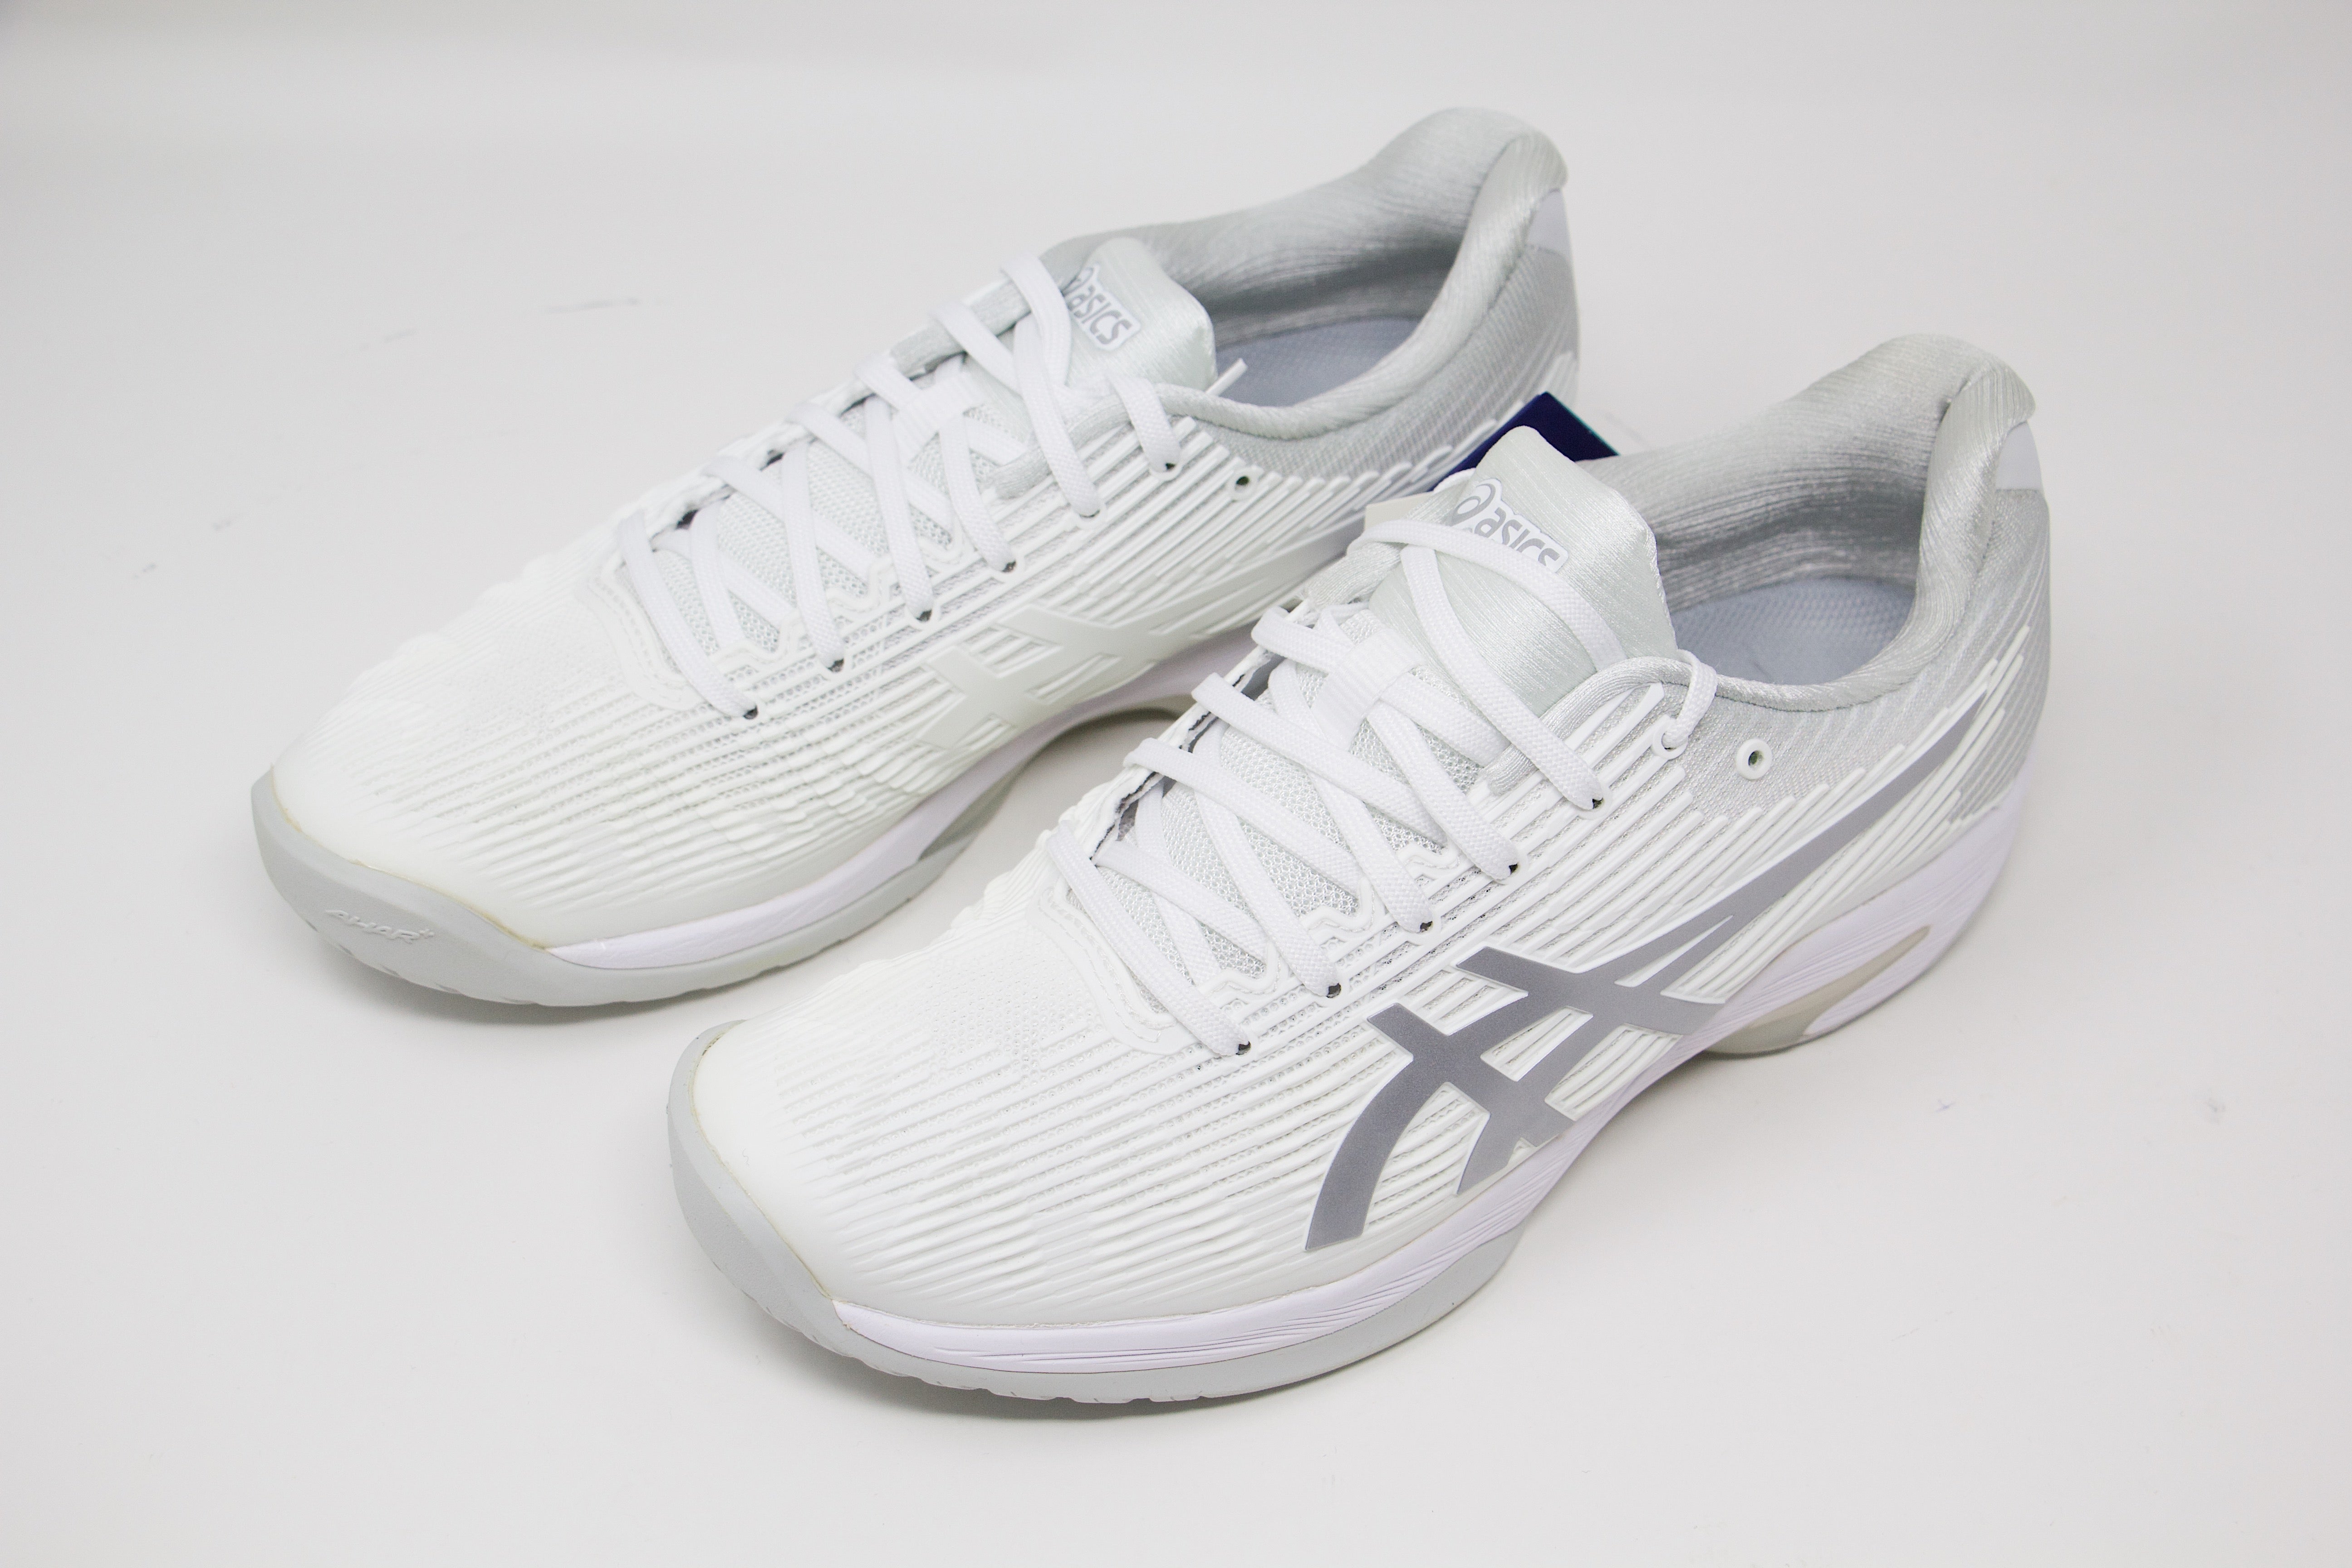 Asics Solution Speed FF PRE-LOVED Womens Tennis Shoes Size UK 7.5